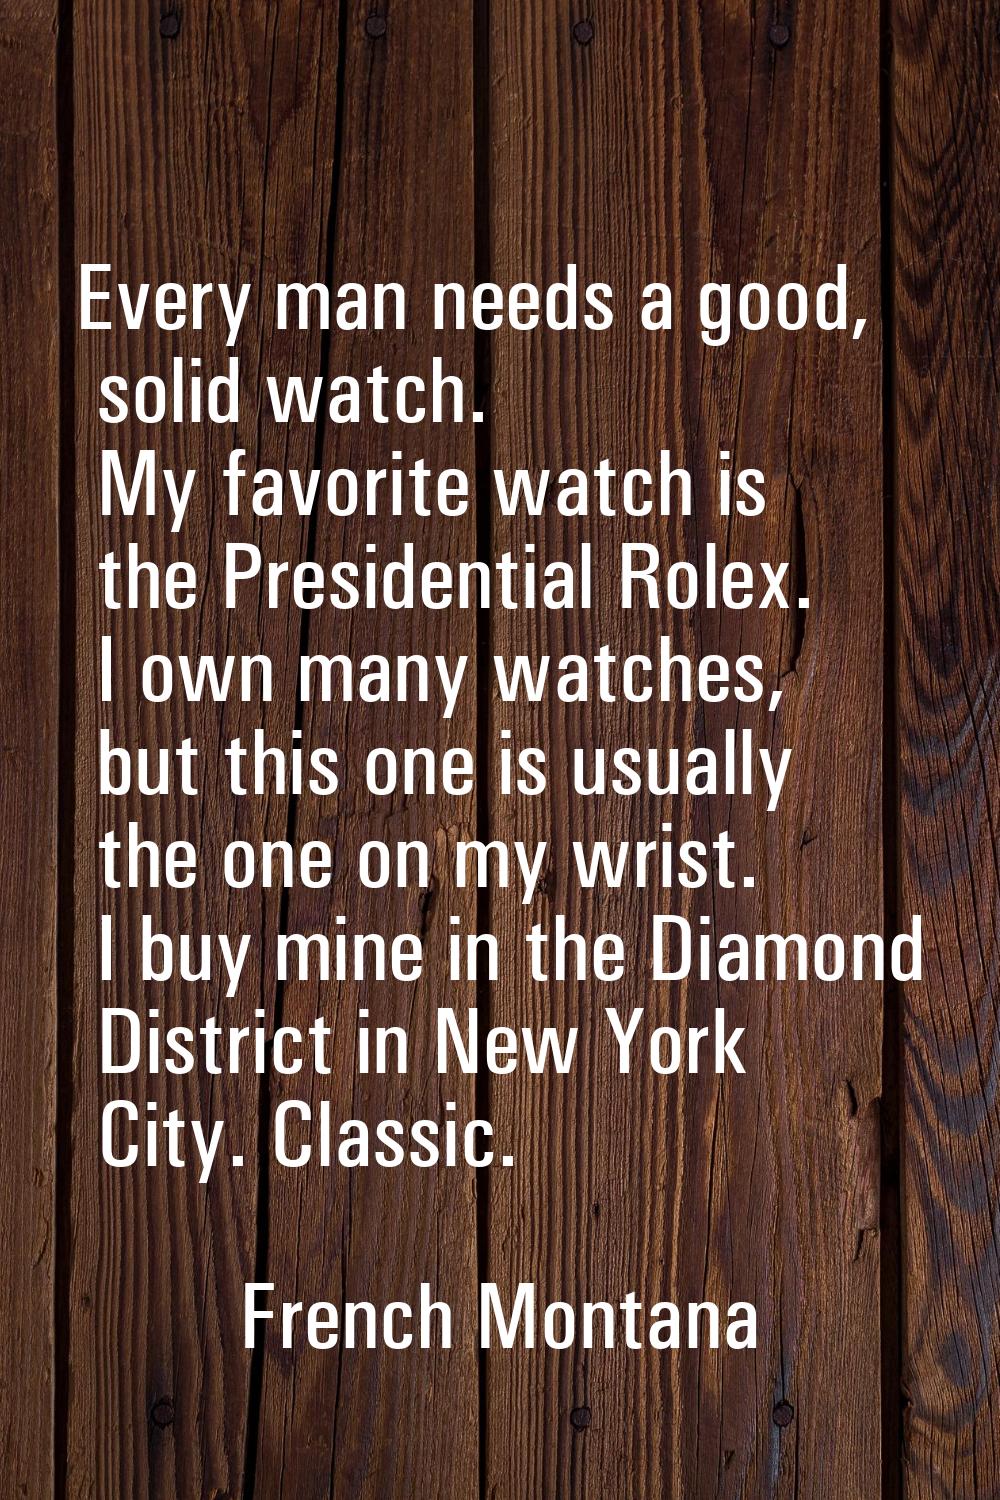 Every man needs a good, solid watch. My favorite watch is the Presidential Rolex. I own many watche